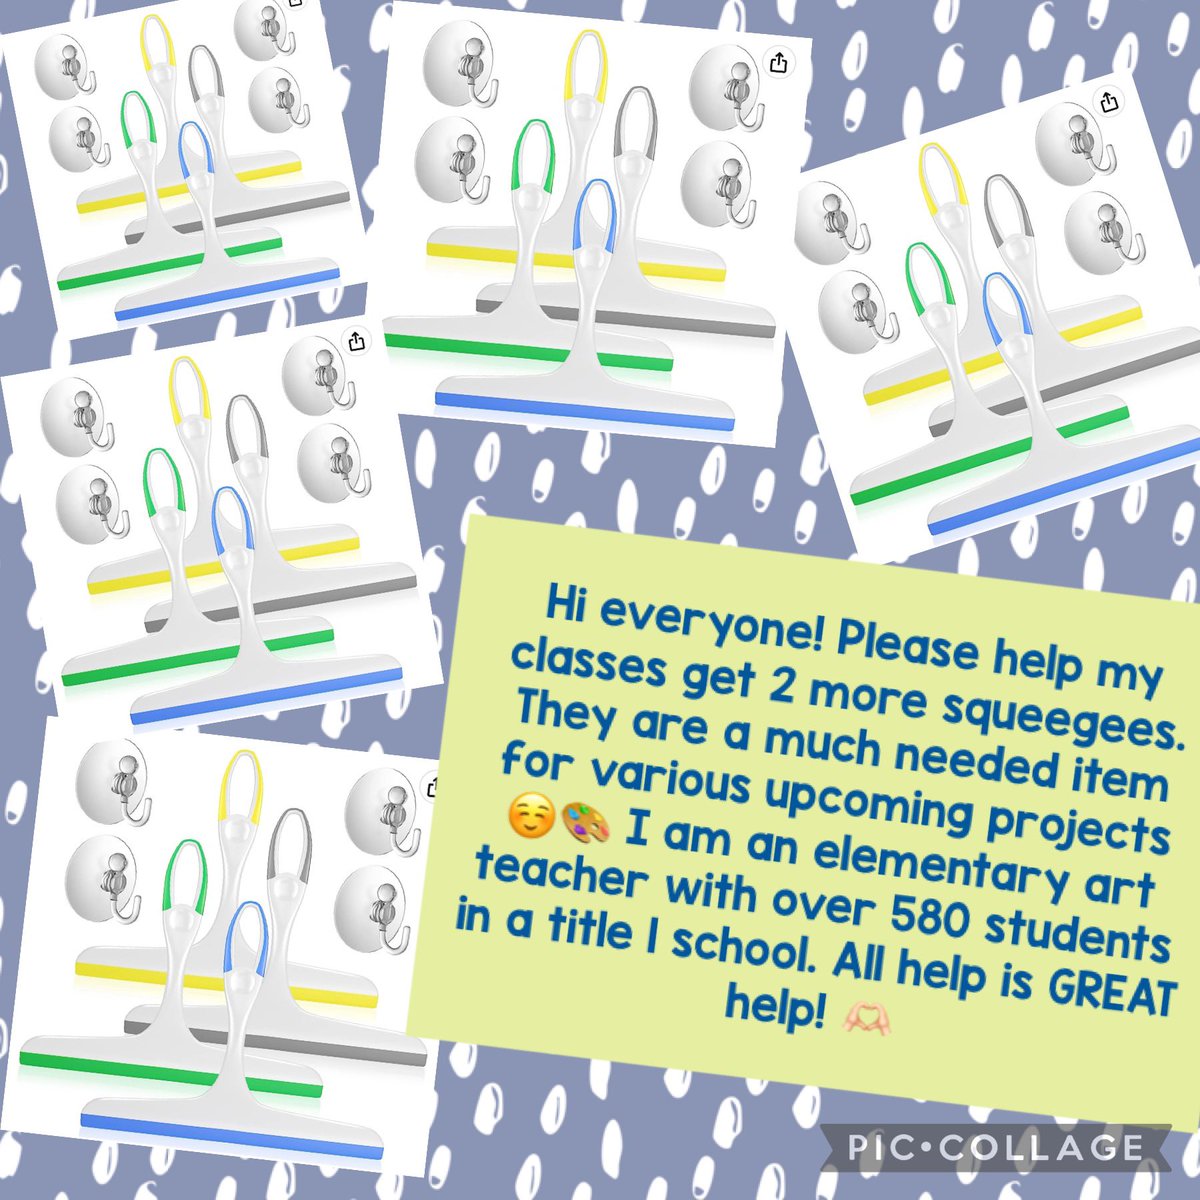 @toolkitsforall Hi #teachersoftwitter & #teachertwitter Hi everyone, my classes still need help to #clearthelist🤞🏻We need2️⃣ squeegee packs! Hi, I’m an Elem art teacher🎨Our list is different😅6 grade levels a day & 580 kids a week💕ALL HELP IS GREAT💜Please take a look👀 amzn.to/3Vkxudm